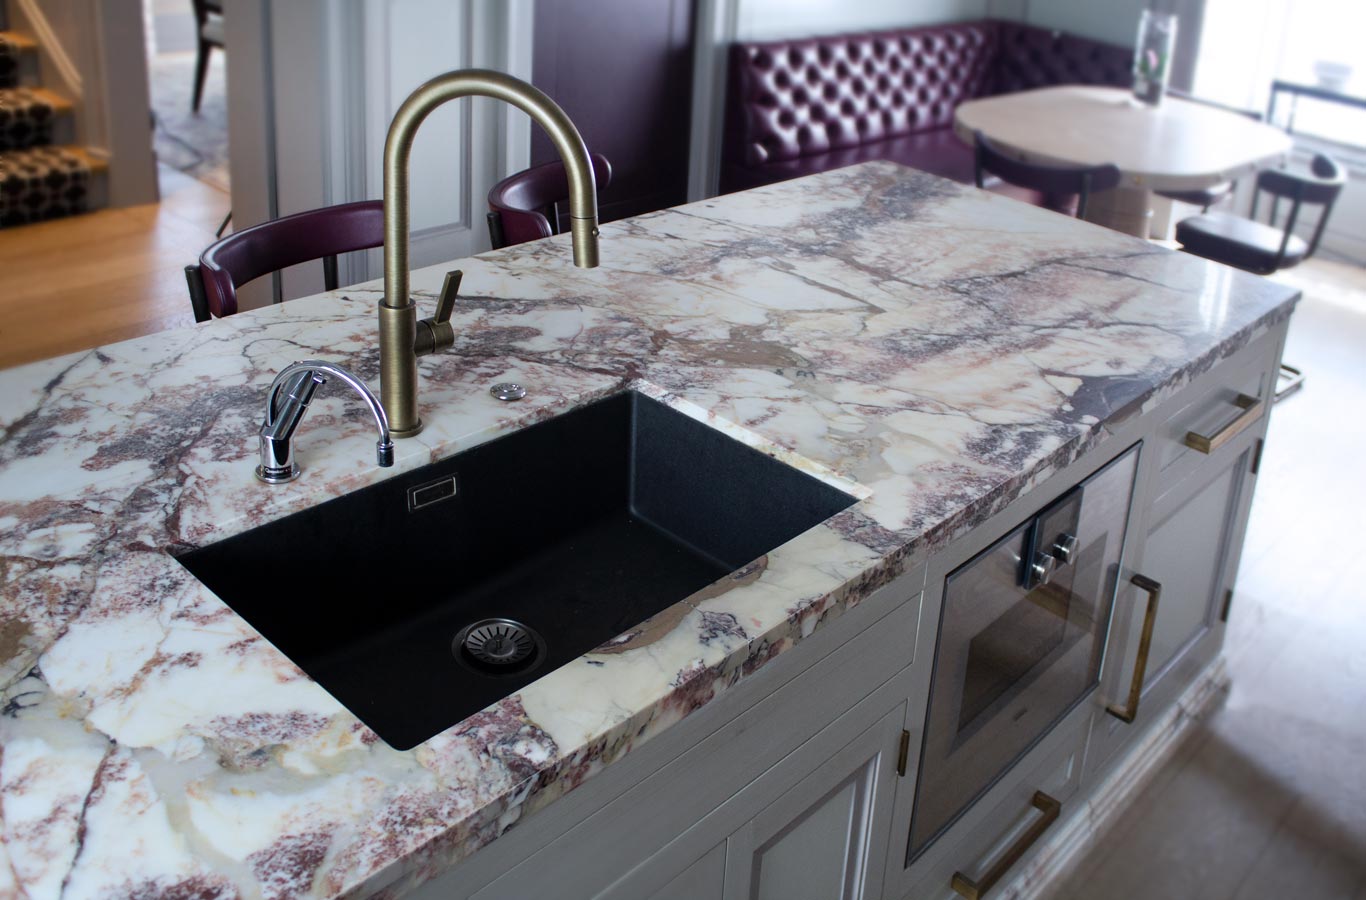 You are currently viewing Marble and Granite: Our Worktops Available in Ealing